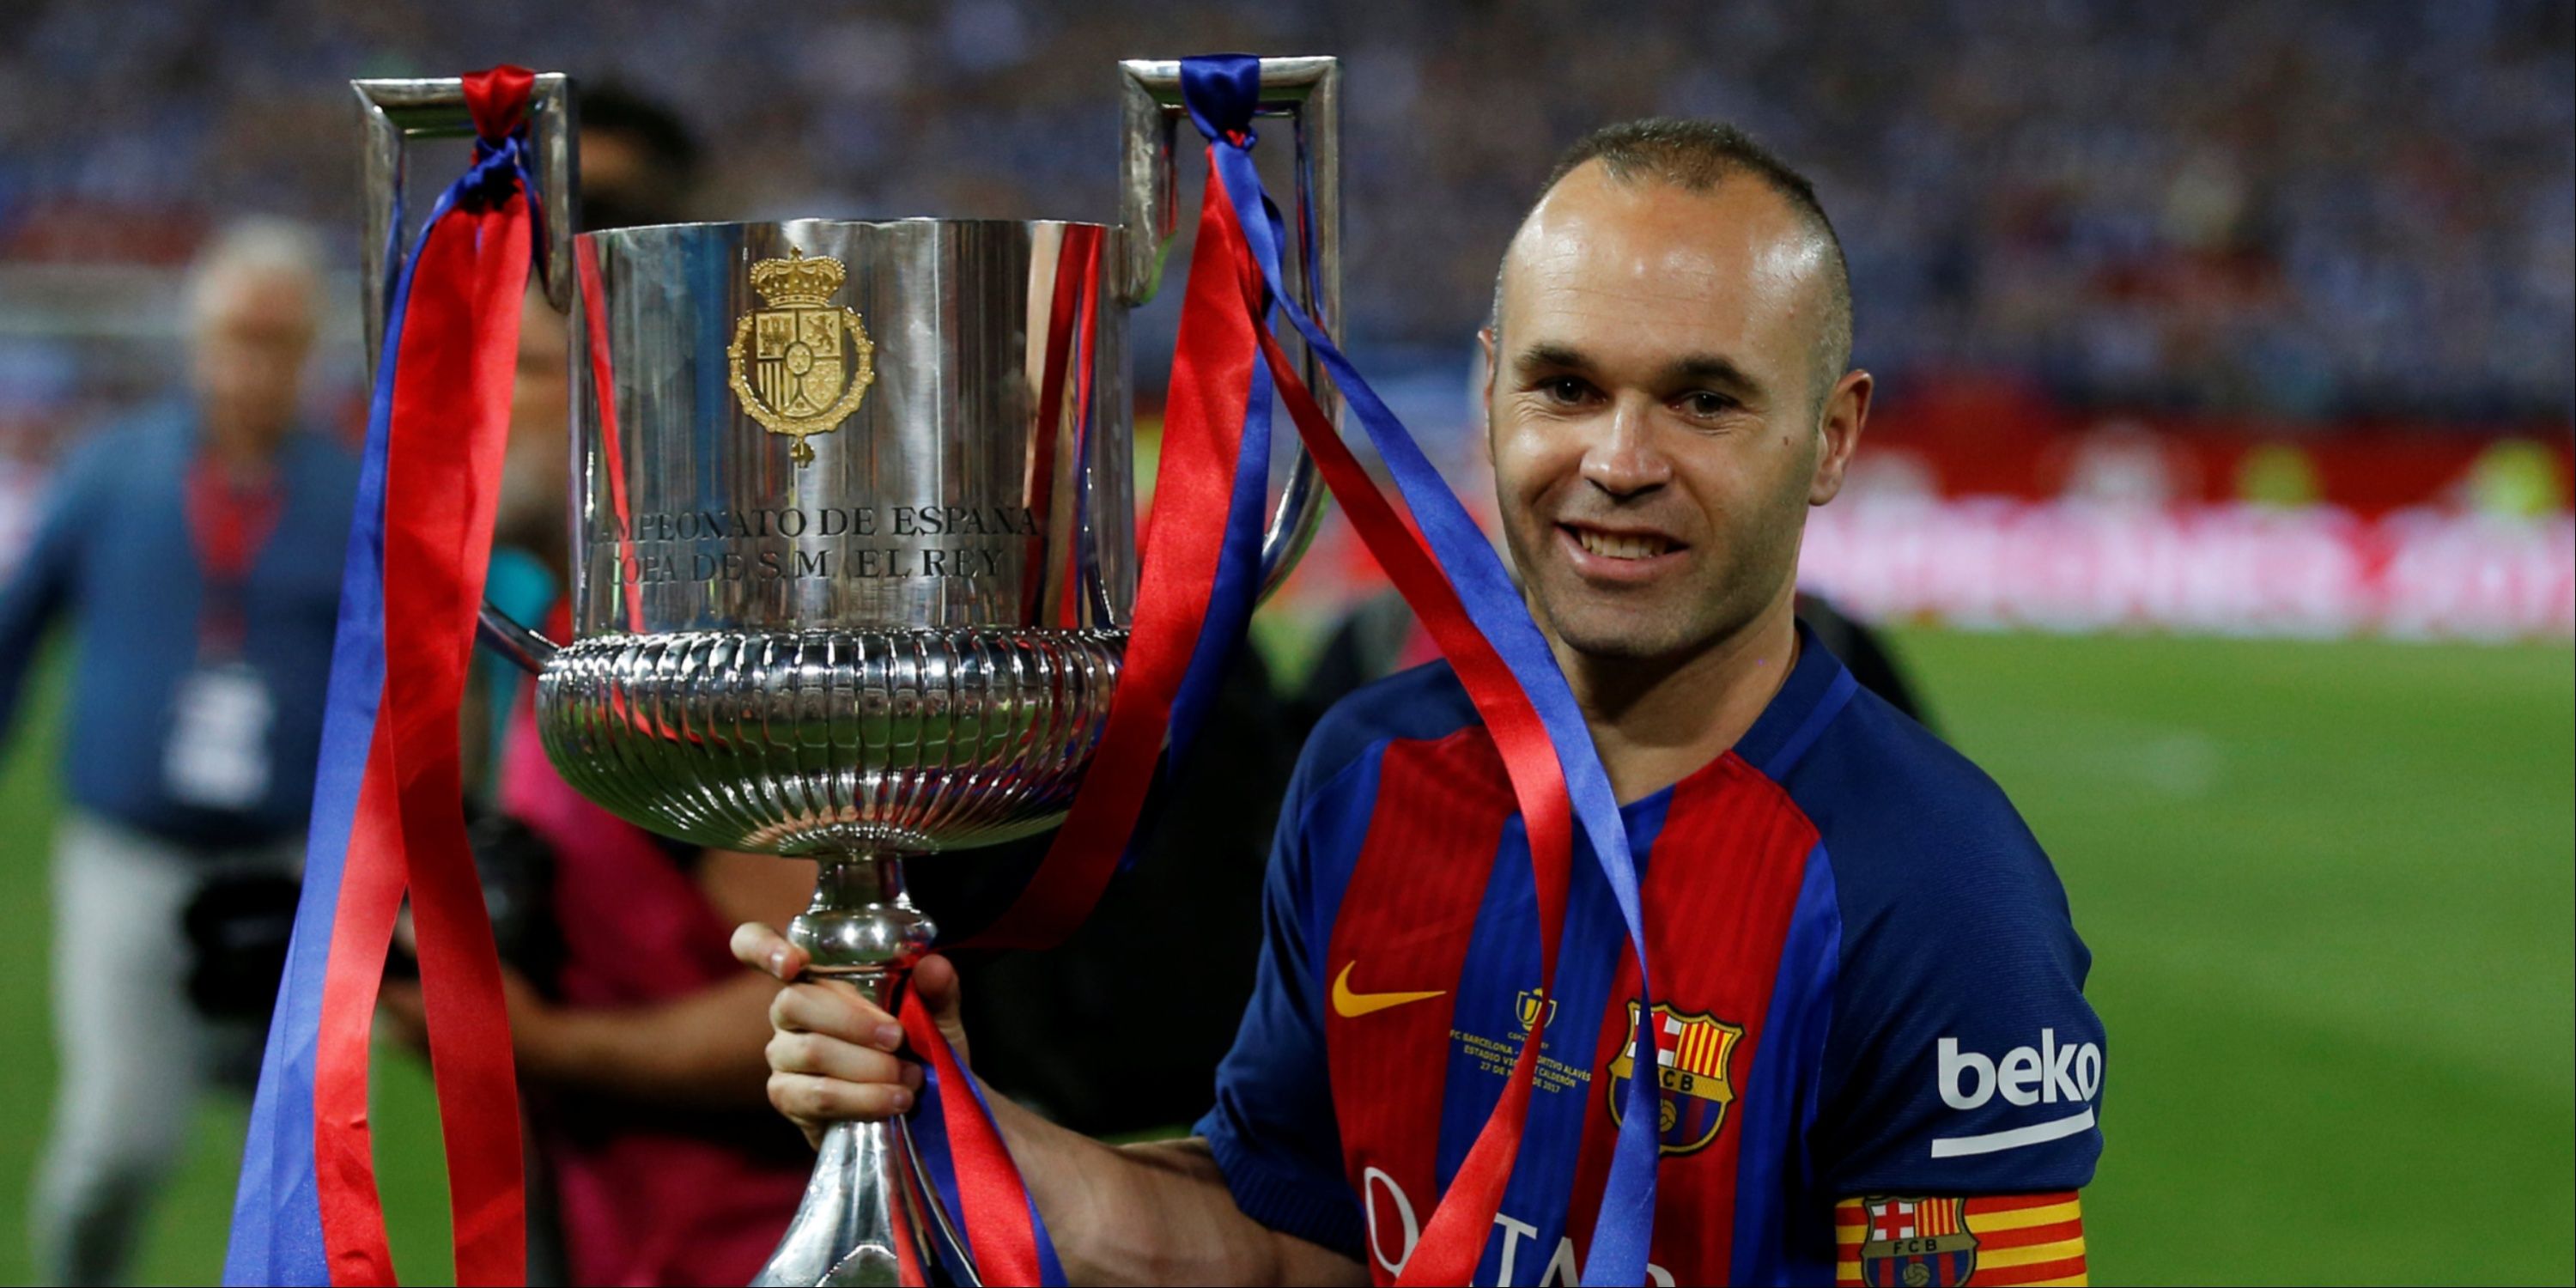 Andres Iniesta celebrates winning a trophy for Barcelona